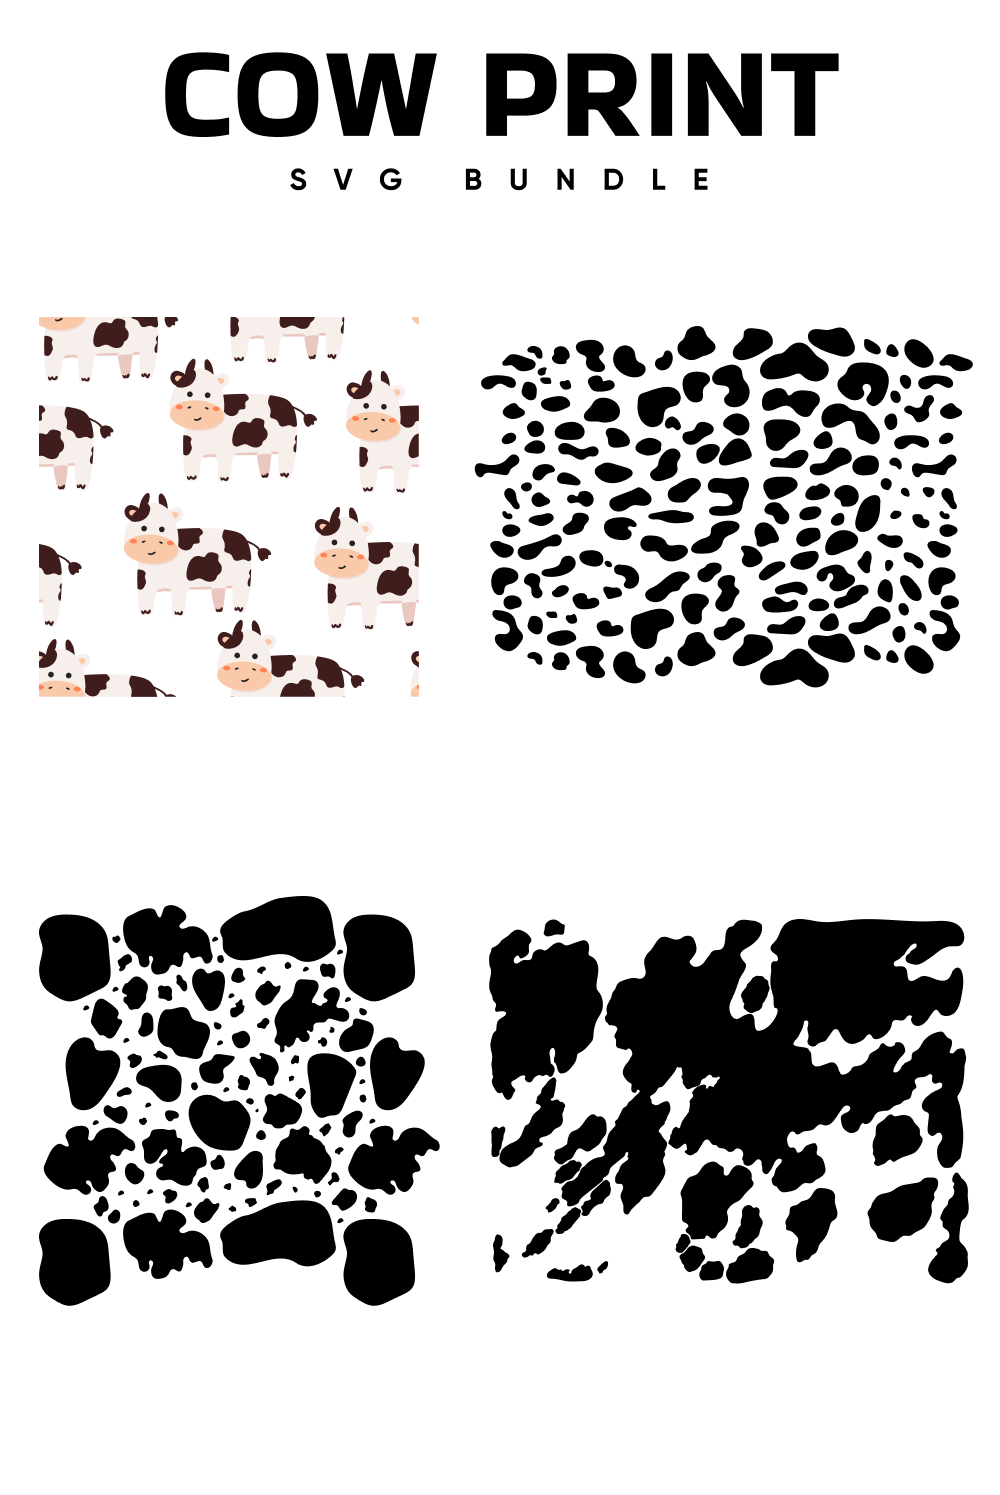 Image of white prints with black spots similar to the color of a cow.